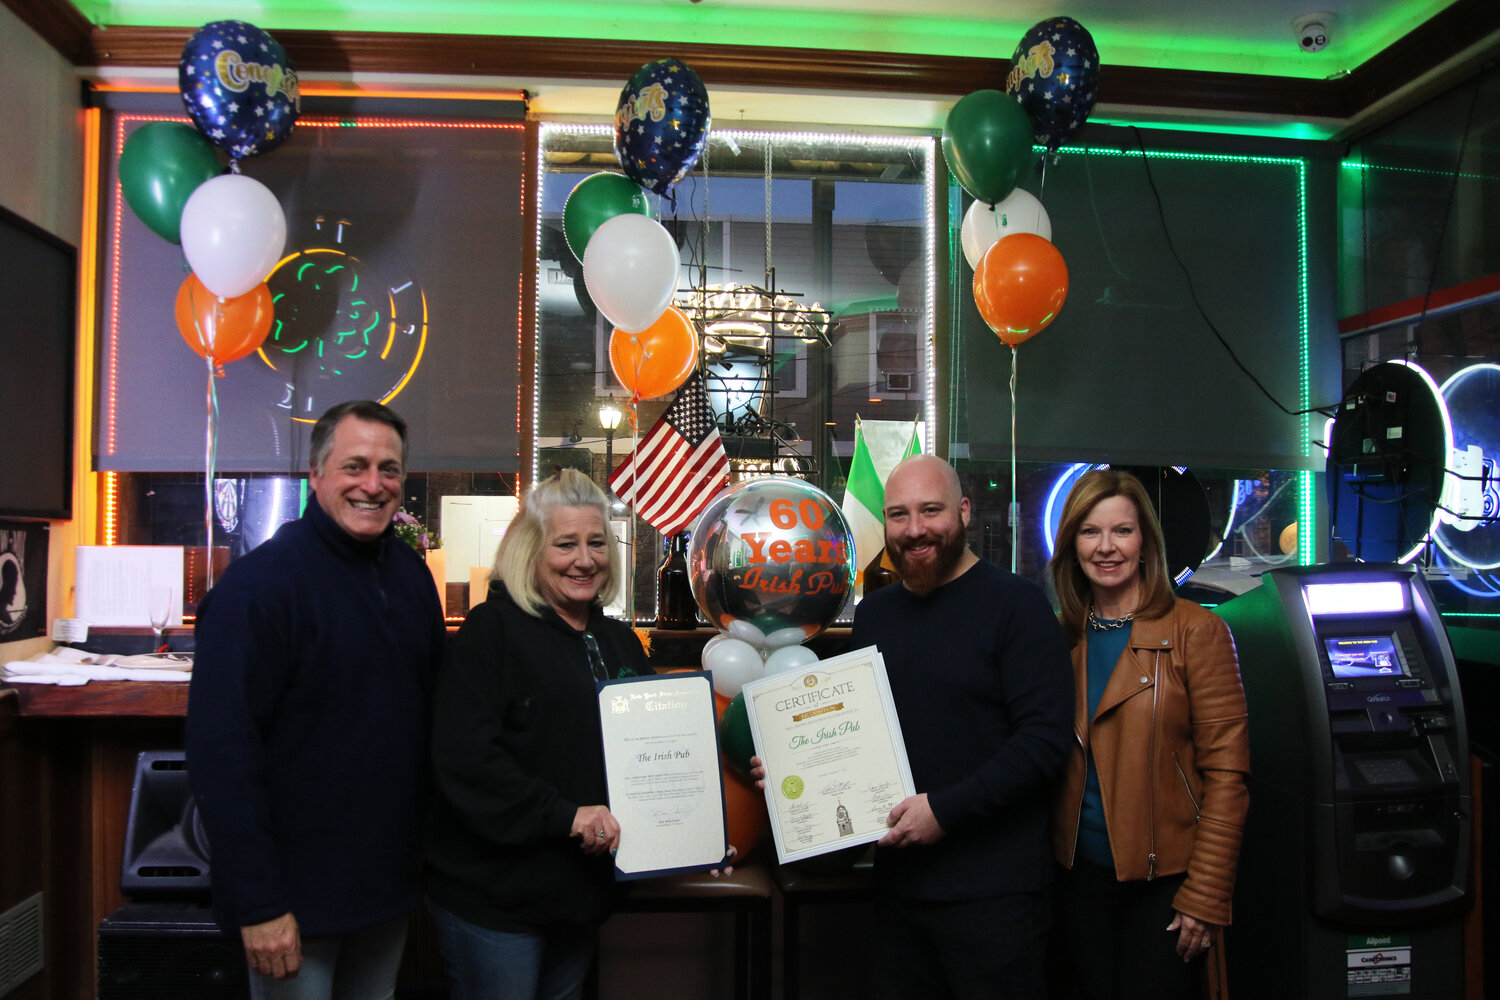 Assemblyman Brian Curran and Town of Hempstead Councilwoman Laura Ryder presented citations to Shawn Sabel with his mother Gail Kaider, stating that they have been in business for 60 years.